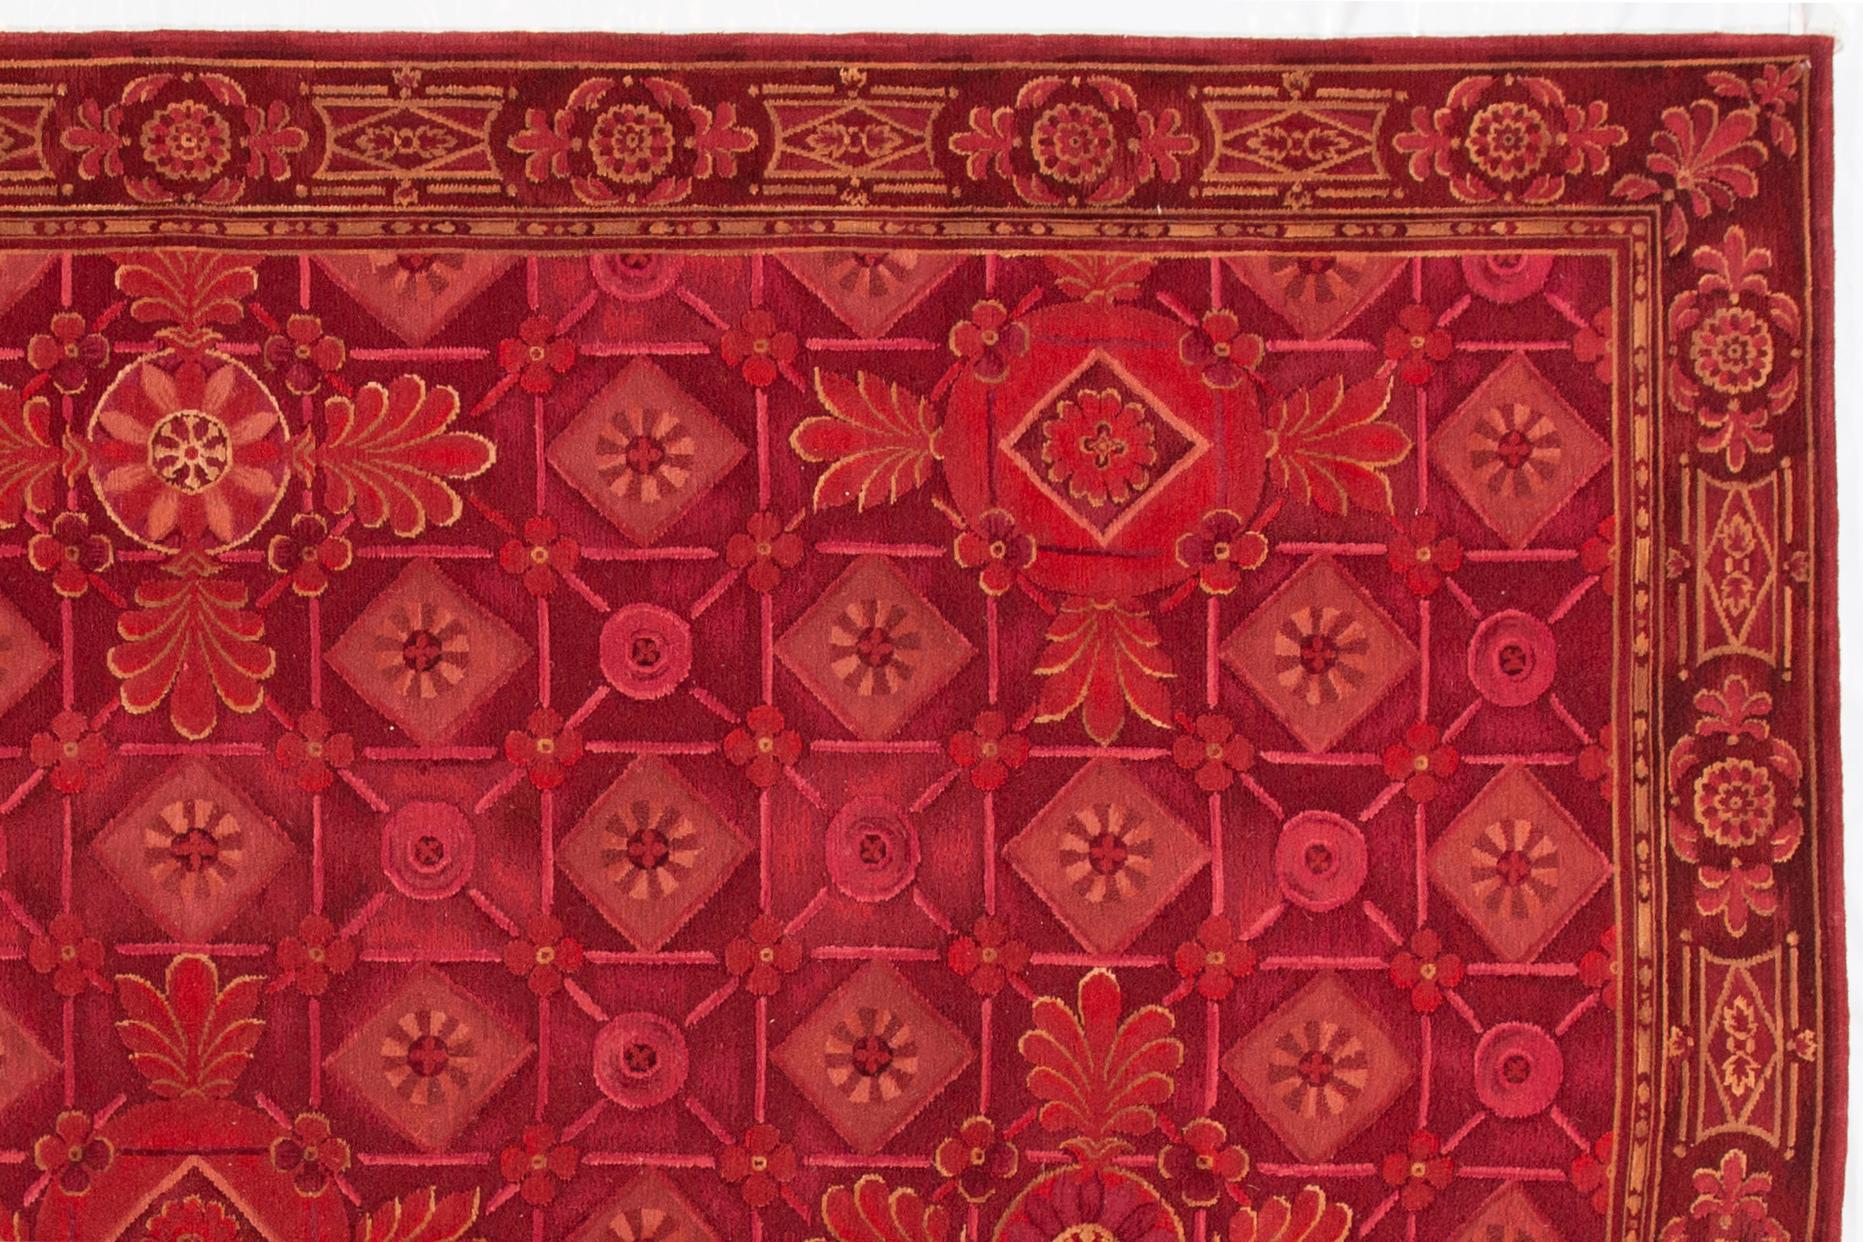 Contemporary Nepalese rug with an all-over geometric red design. This piece has fine details, great colors, and a beautiful design. It would be the perfect addition to your home. 

This rug measures 9'0